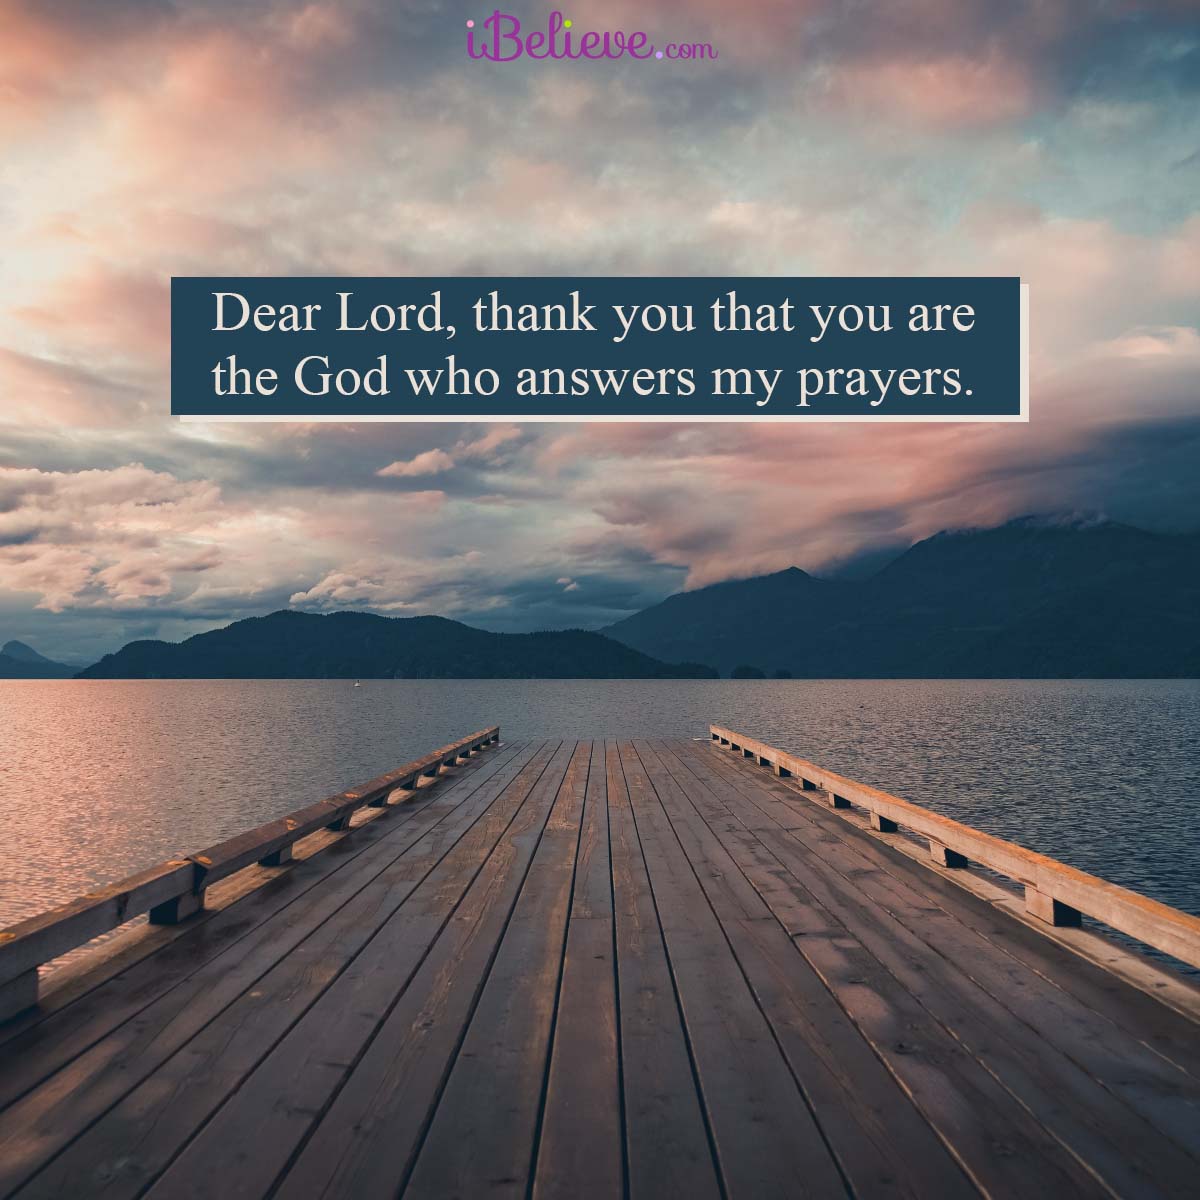 God answers our prayers, inspirational images